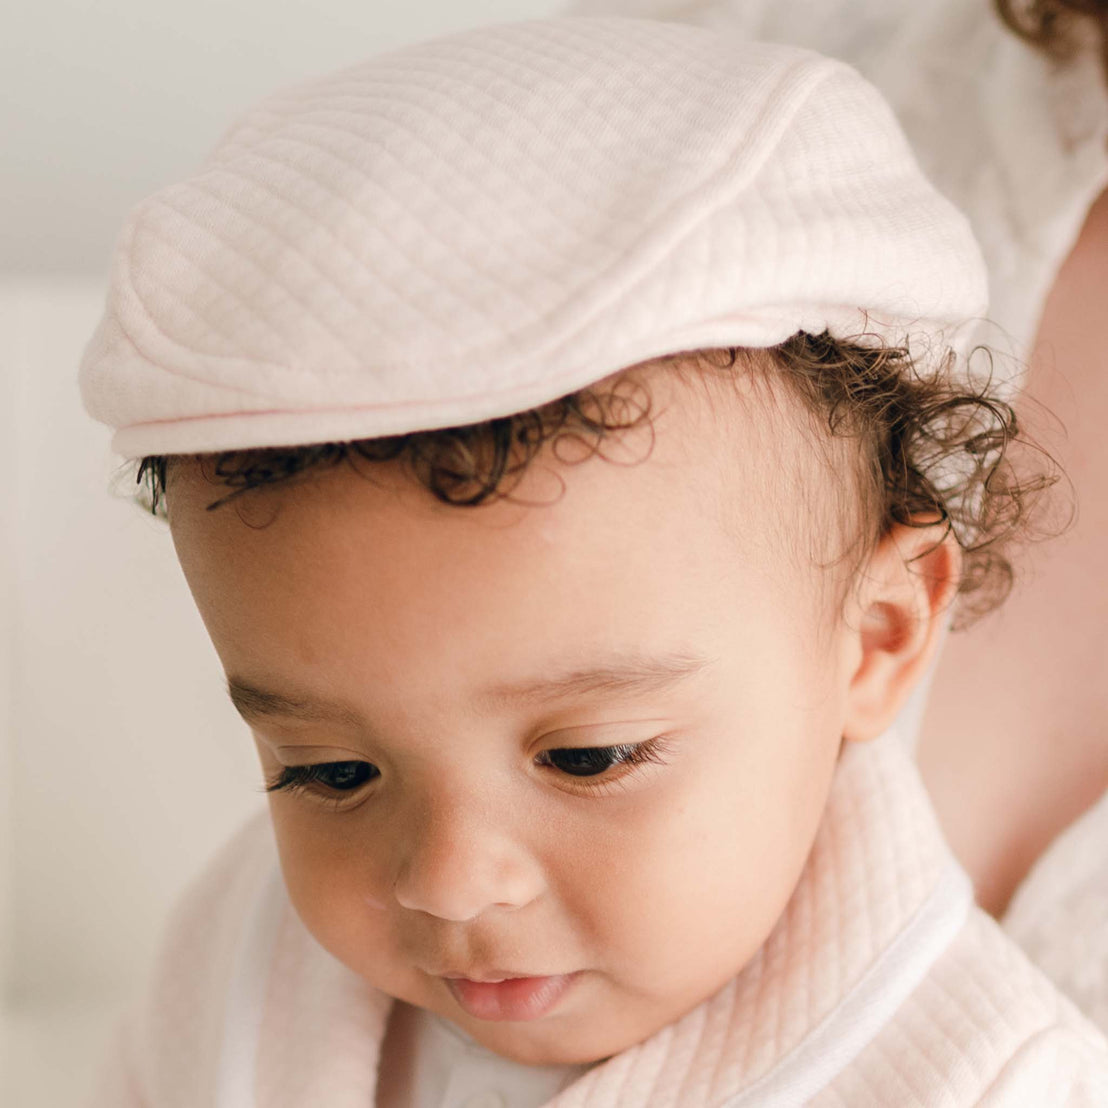 Baby boy wearing the pink Asher Quilted Newsboy Cap made from 100% Quilted Cotton with a soft elastic back.